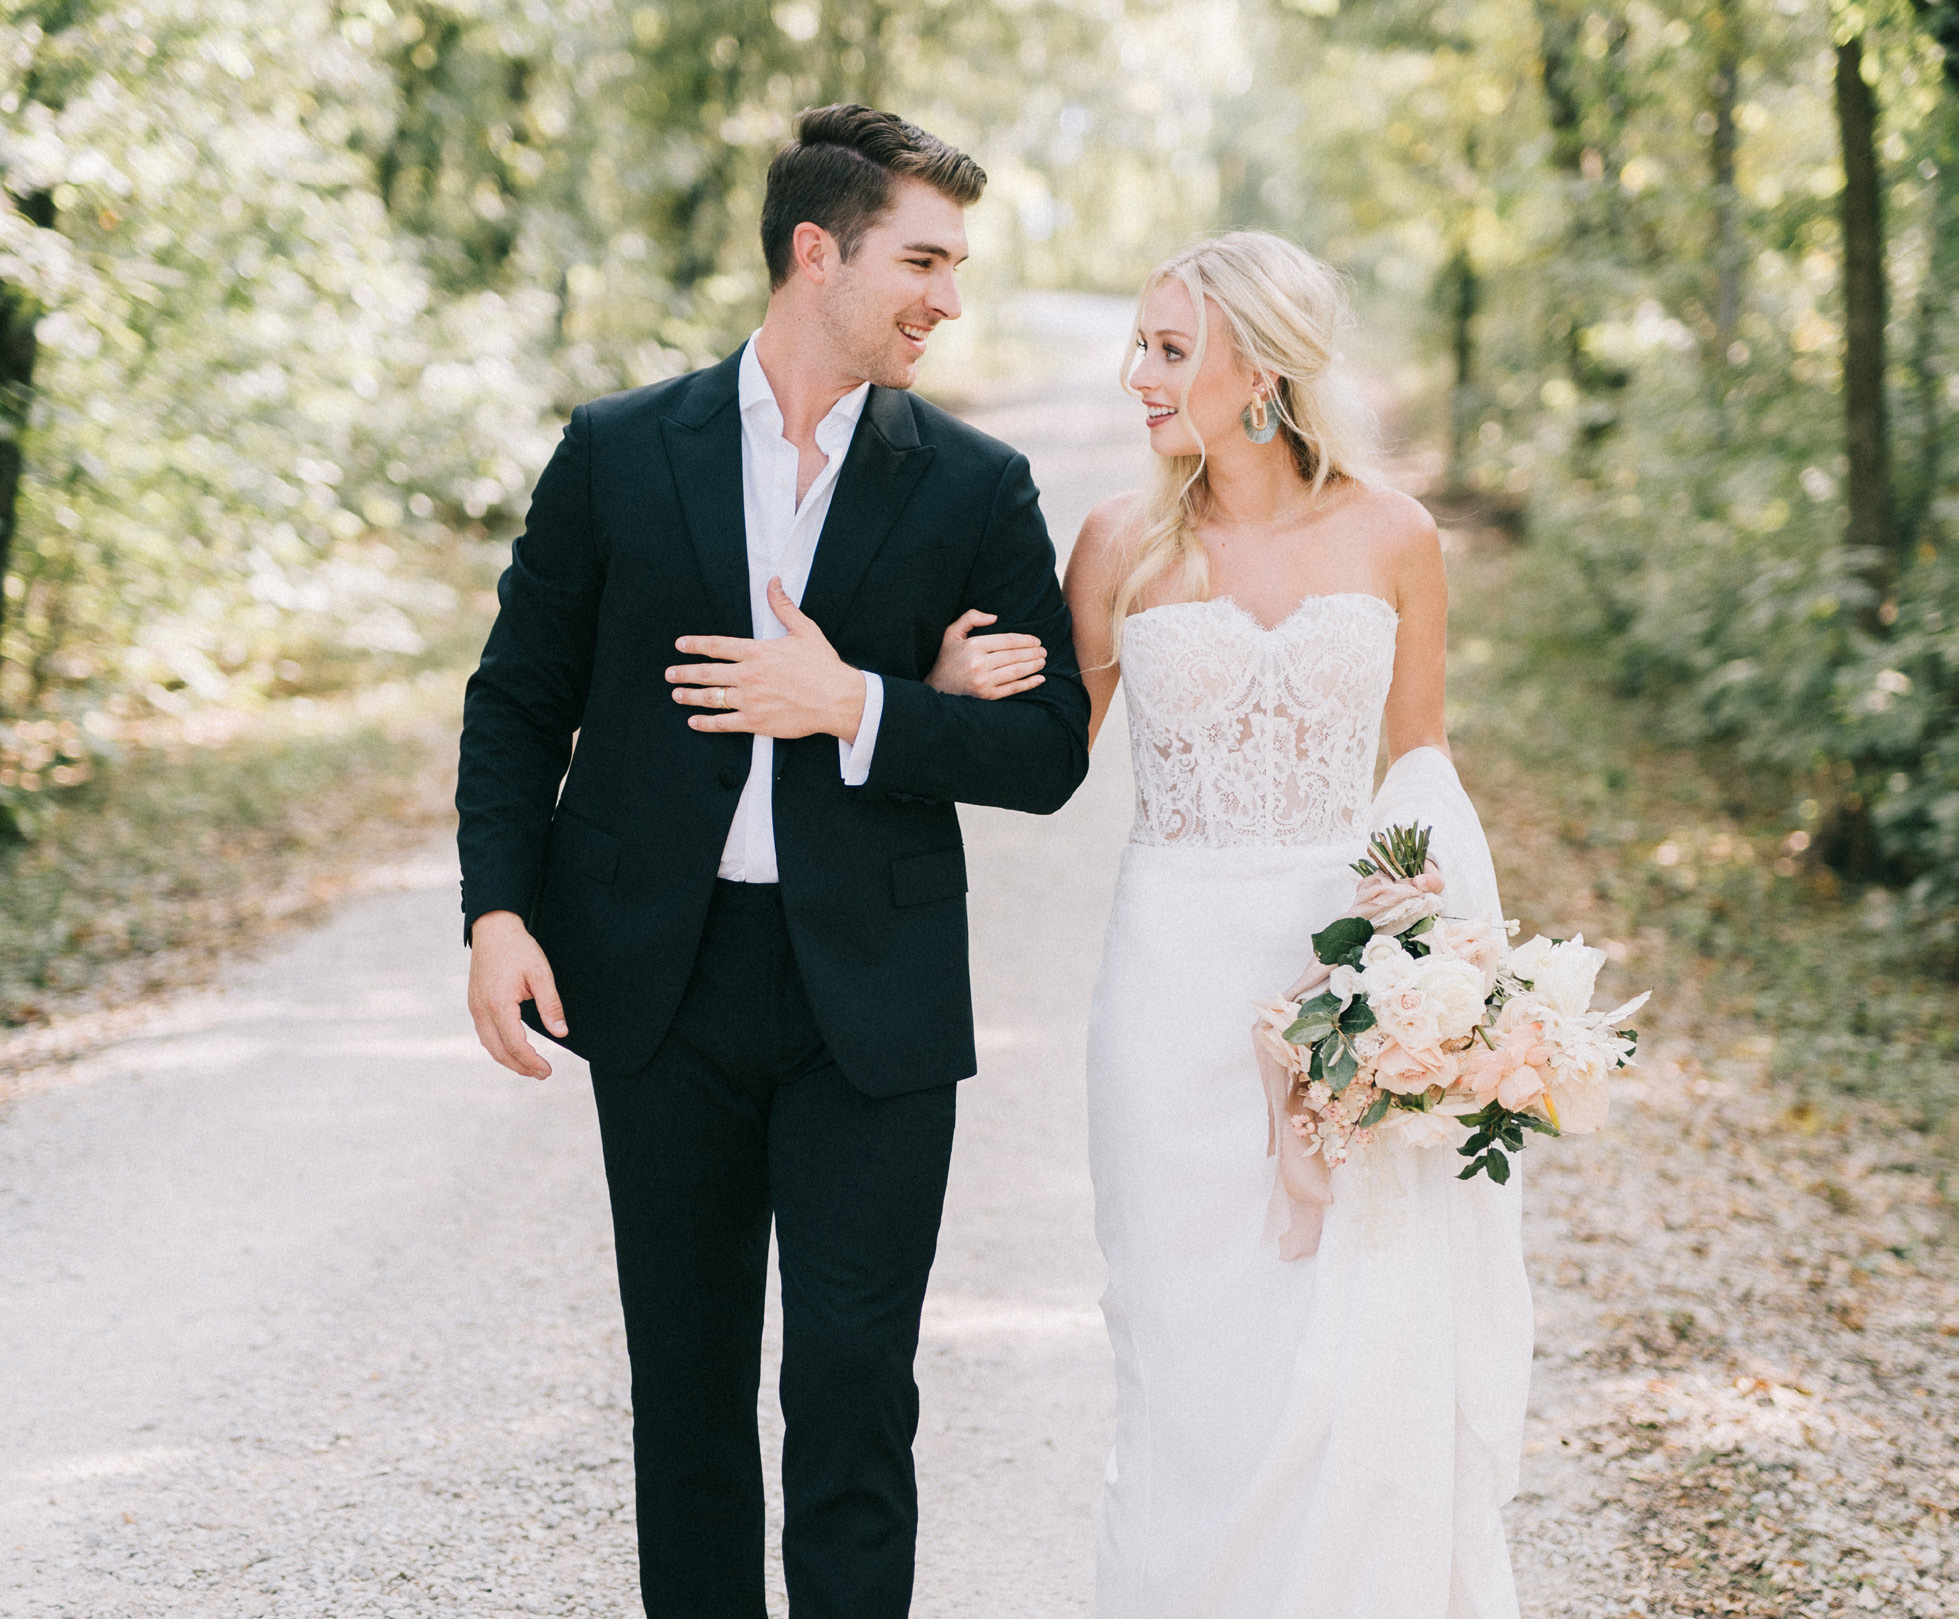 Jen Rios Weddings – French Country Romance by Charla Story Photography